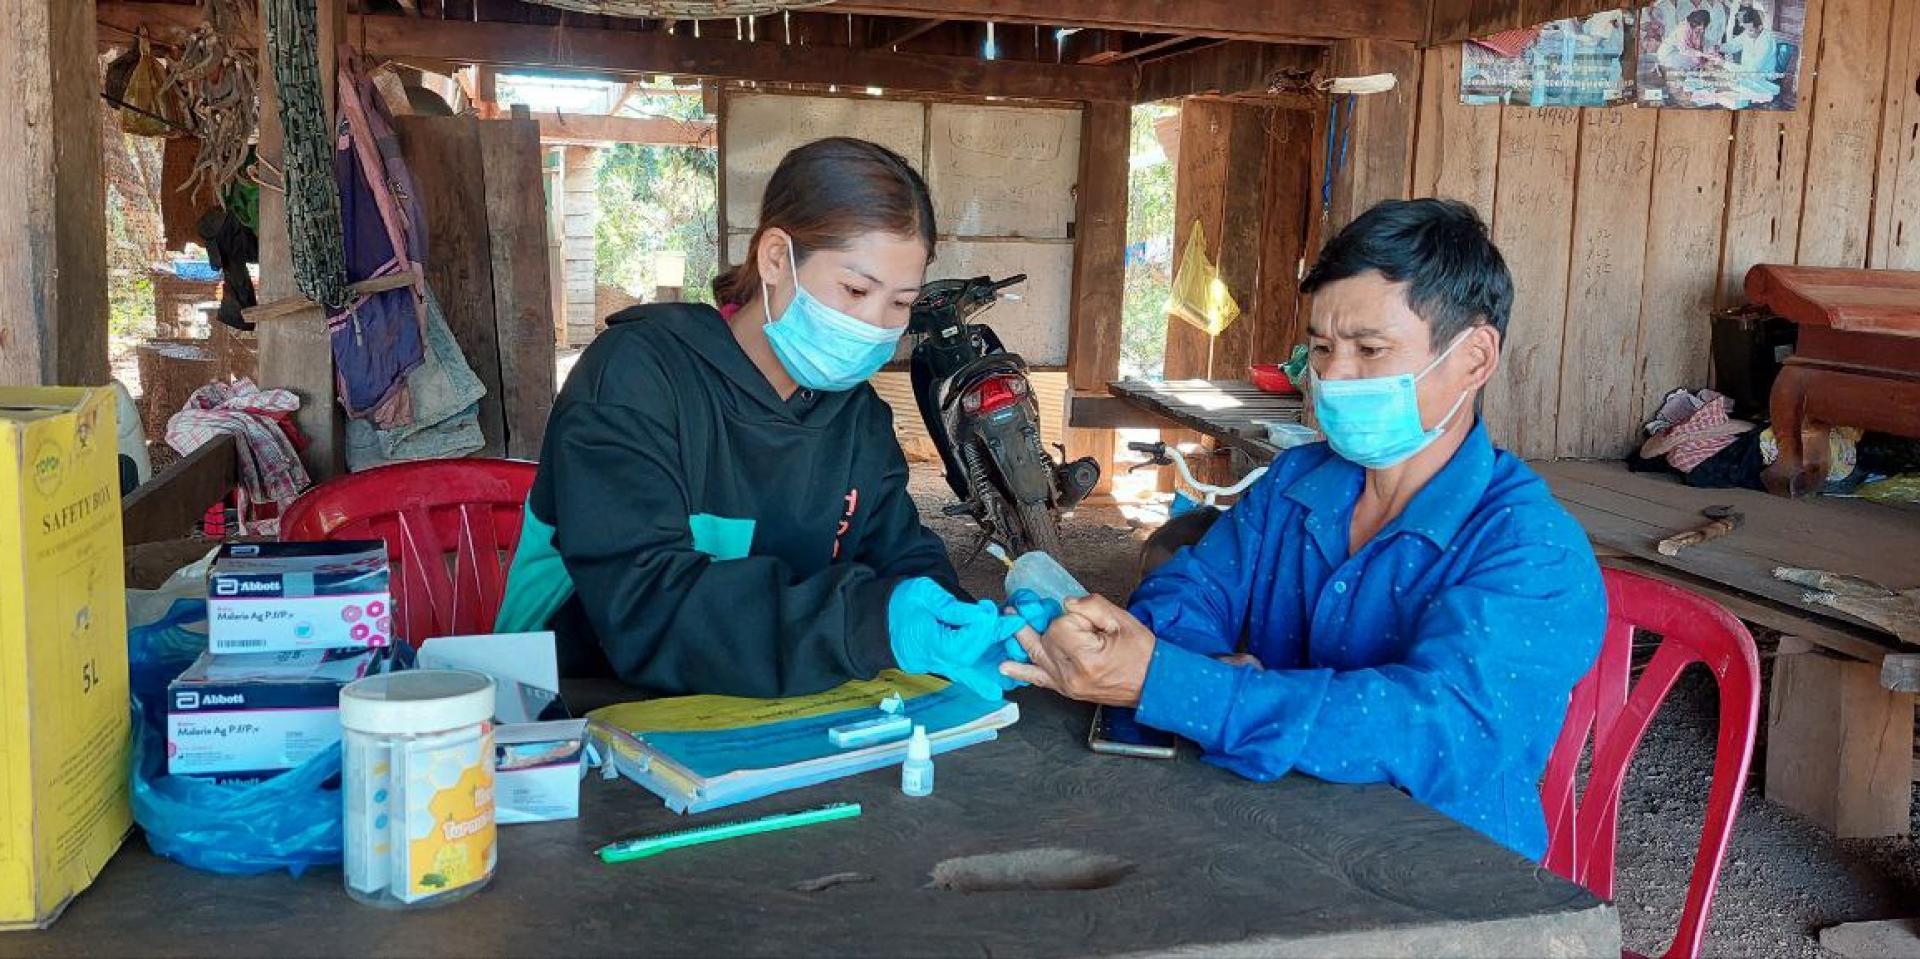 Village Malaria Worker Ms. Srey Touch conducts a malaria rapid diagnostic test in her village. Photo: UNOPS ARHC